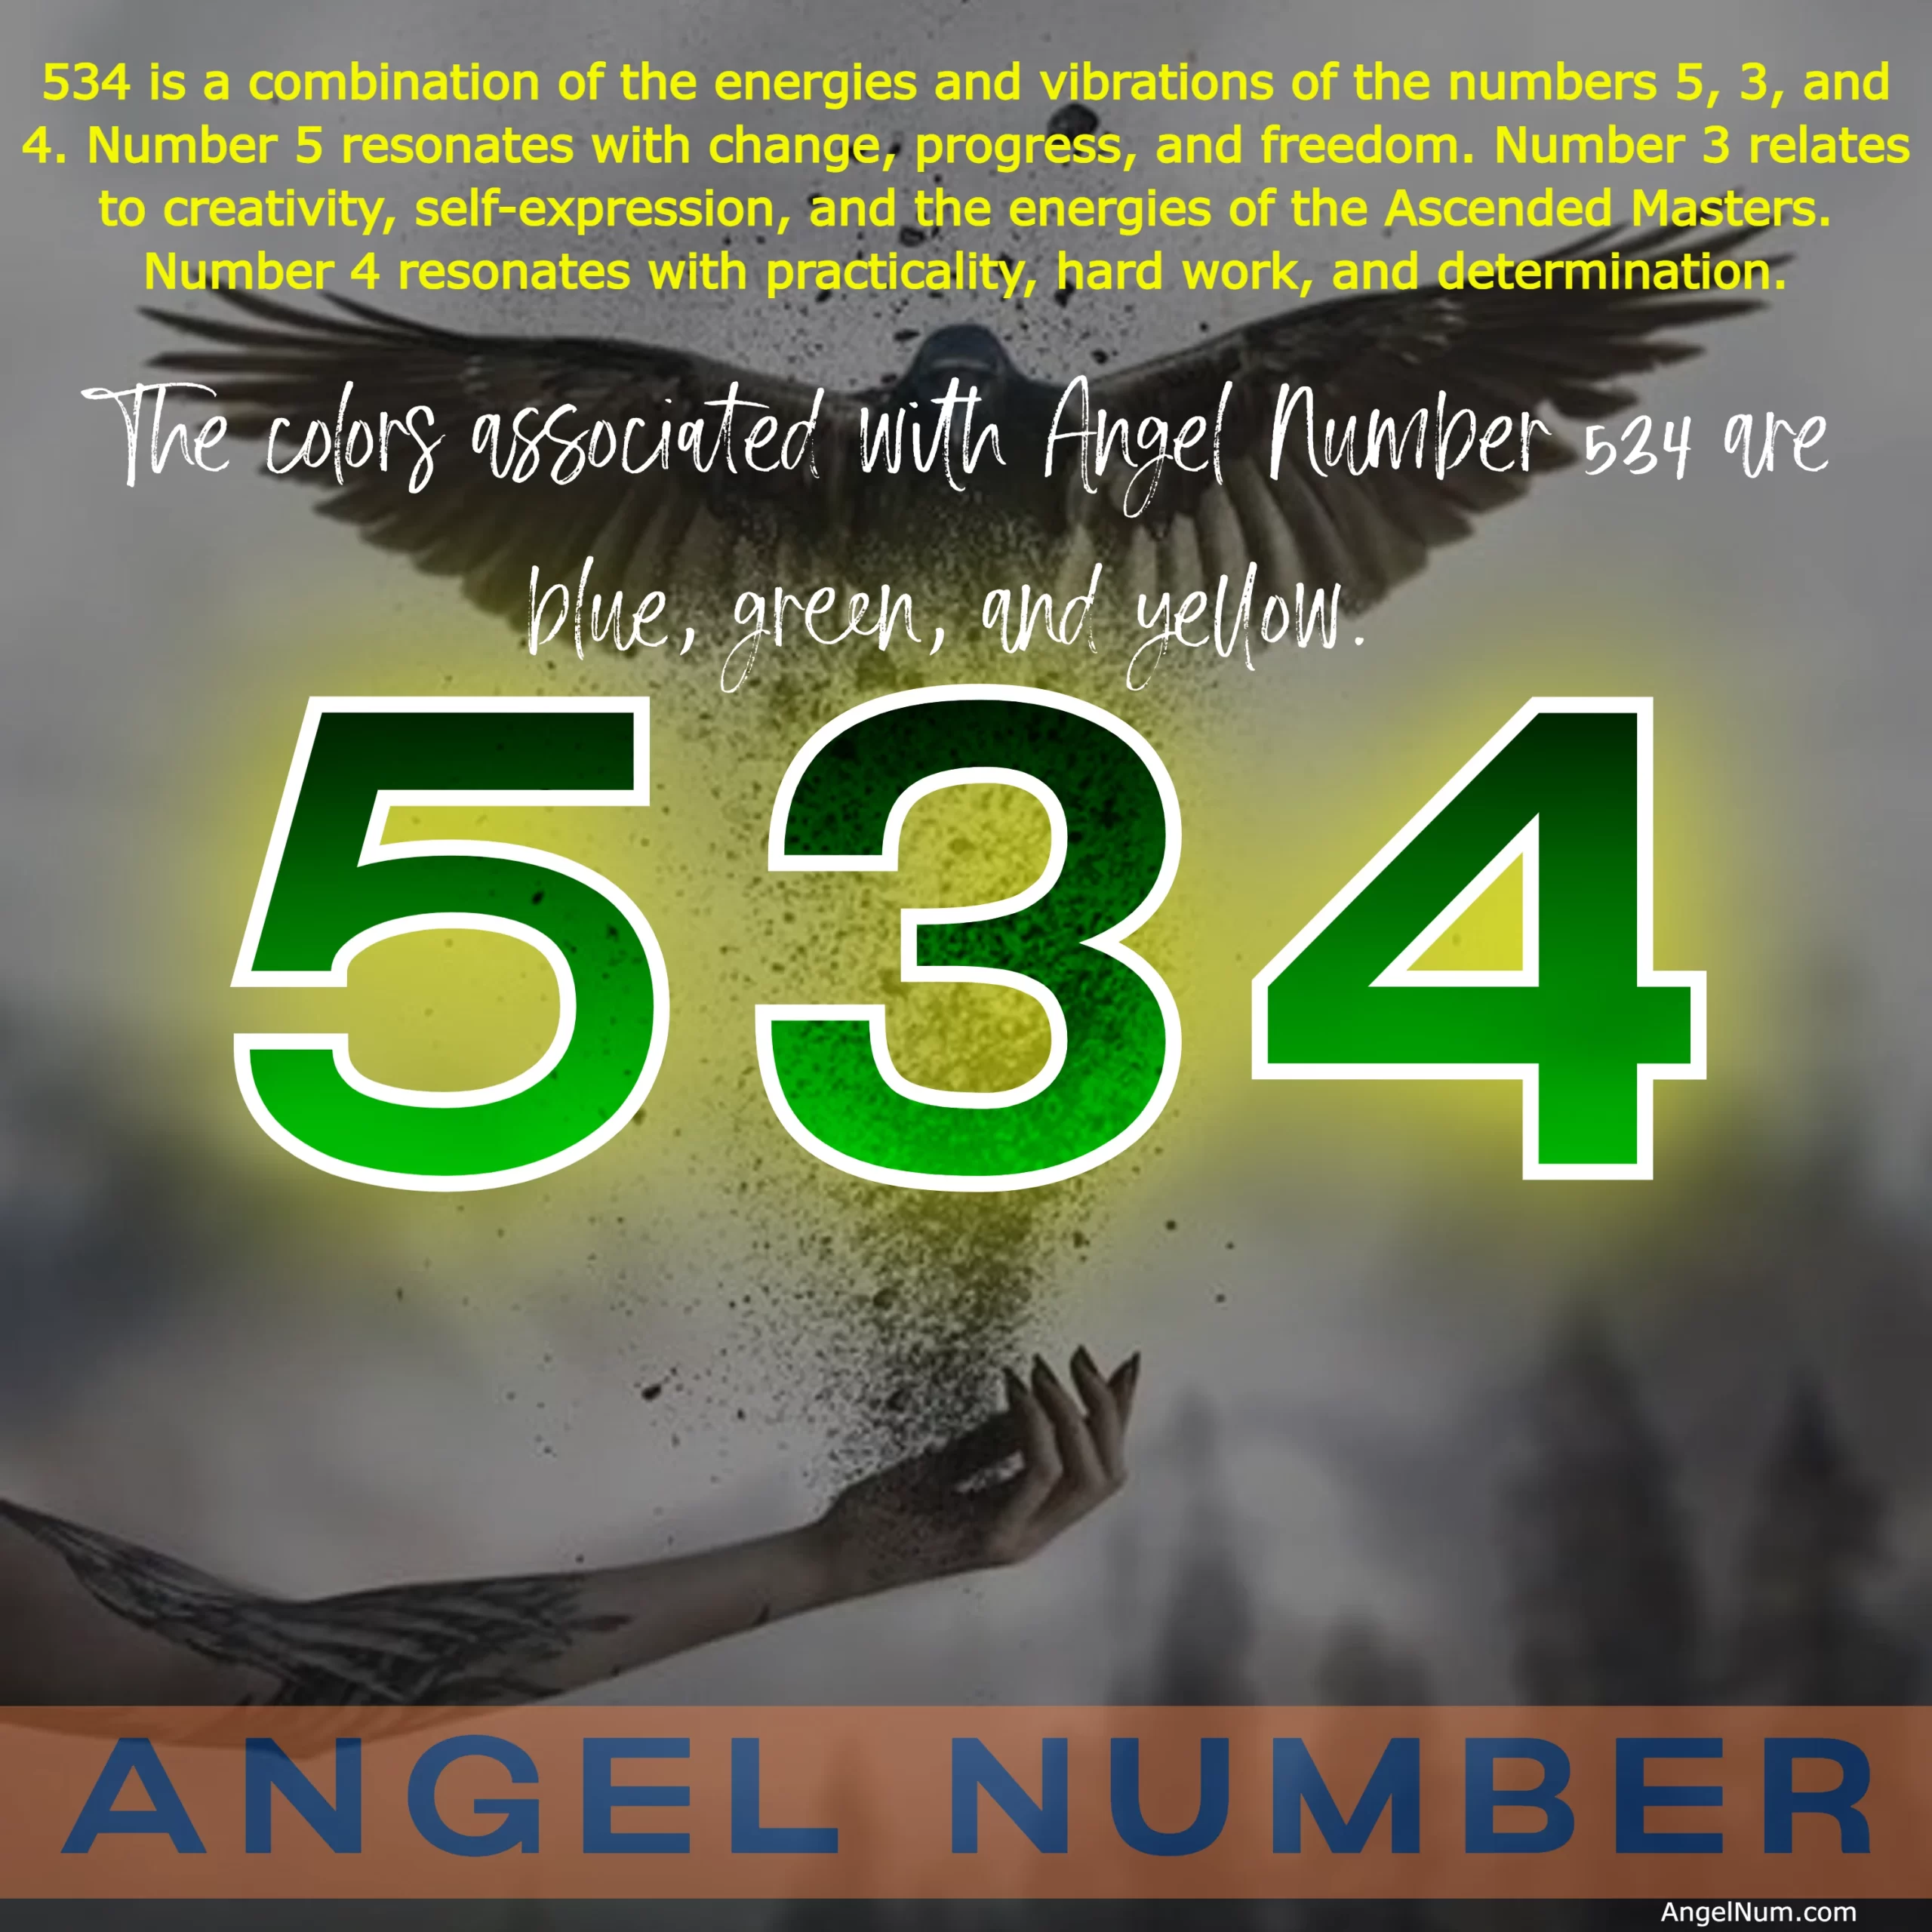 Angel Number 534: Trust the Changes and Transitions in Your Life